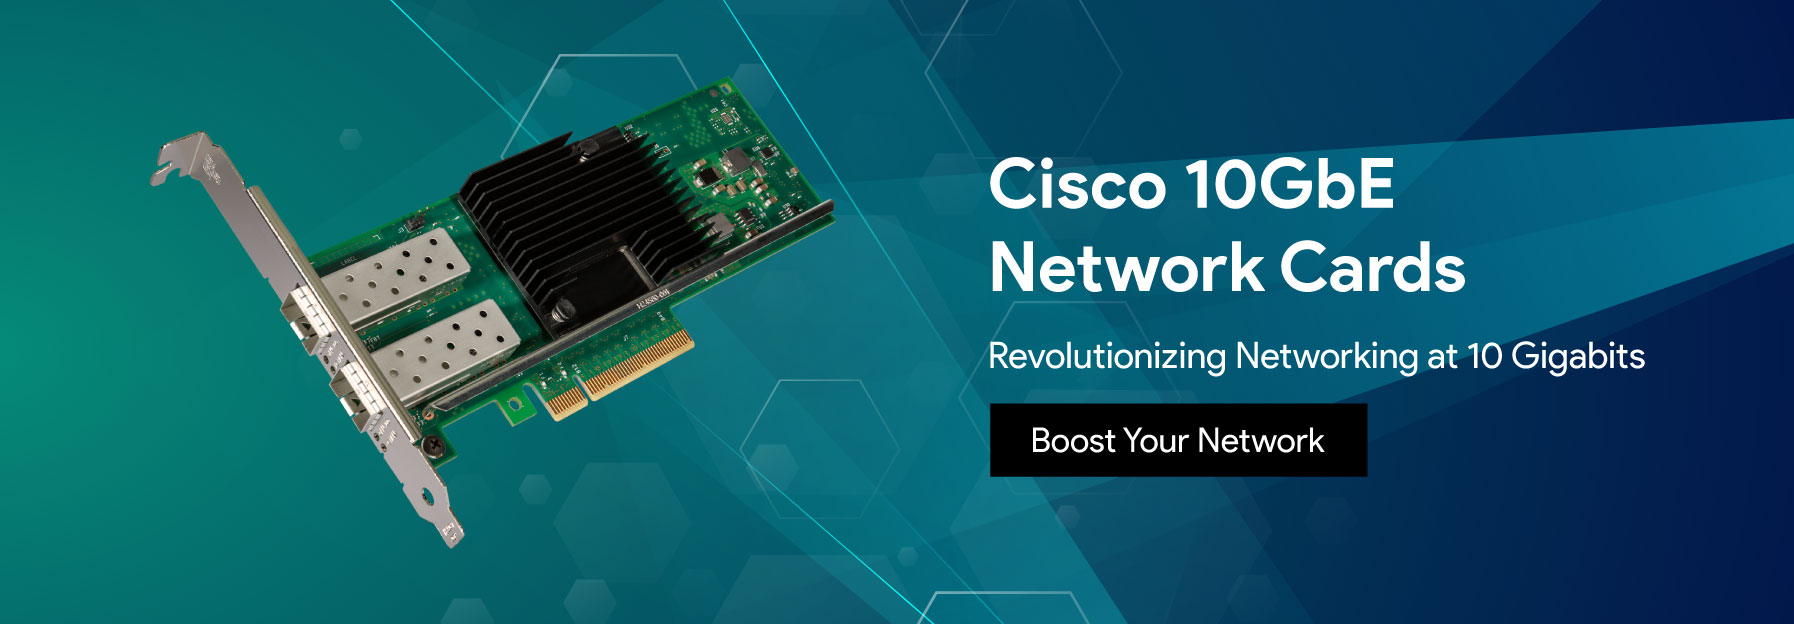 cisco-10gbe network cards